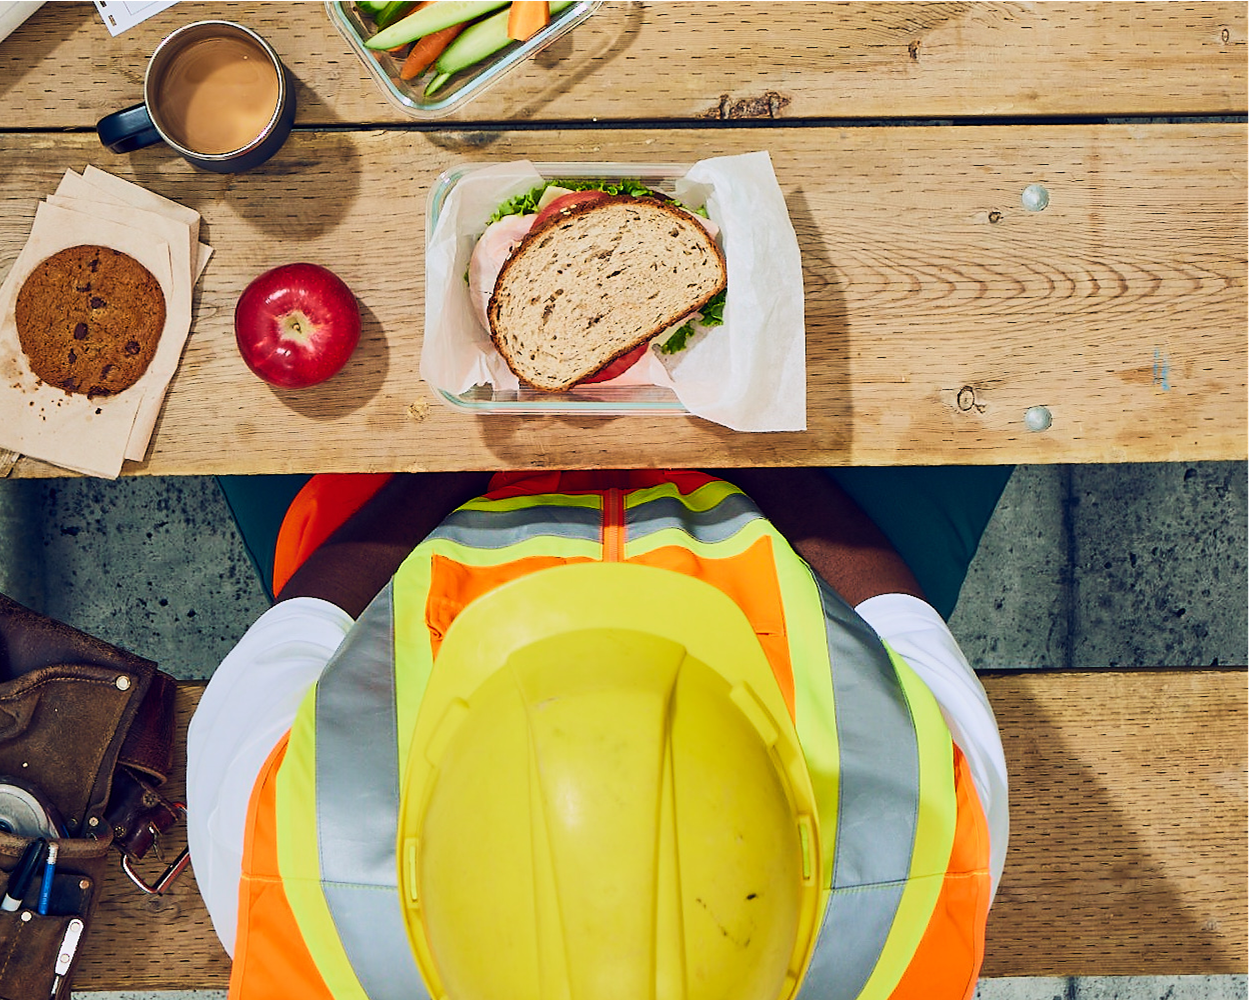 Man in construction outfit with hearty lunch